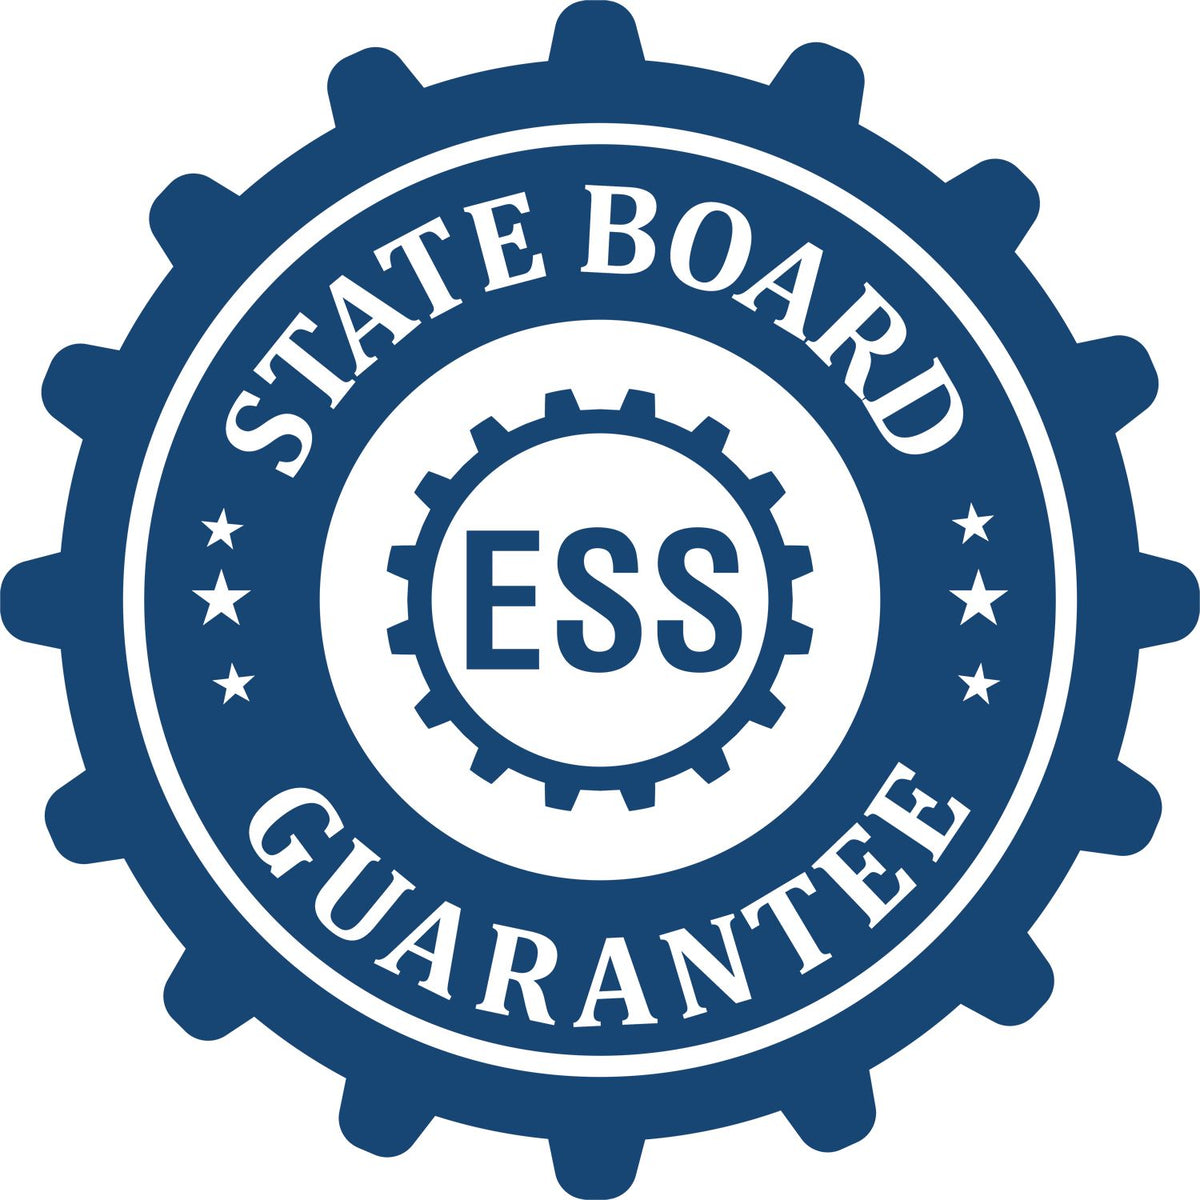 An emblem in a gear shape illustrating a state board guarantee for the Handheld Alaska Land Surveyor Seal product.